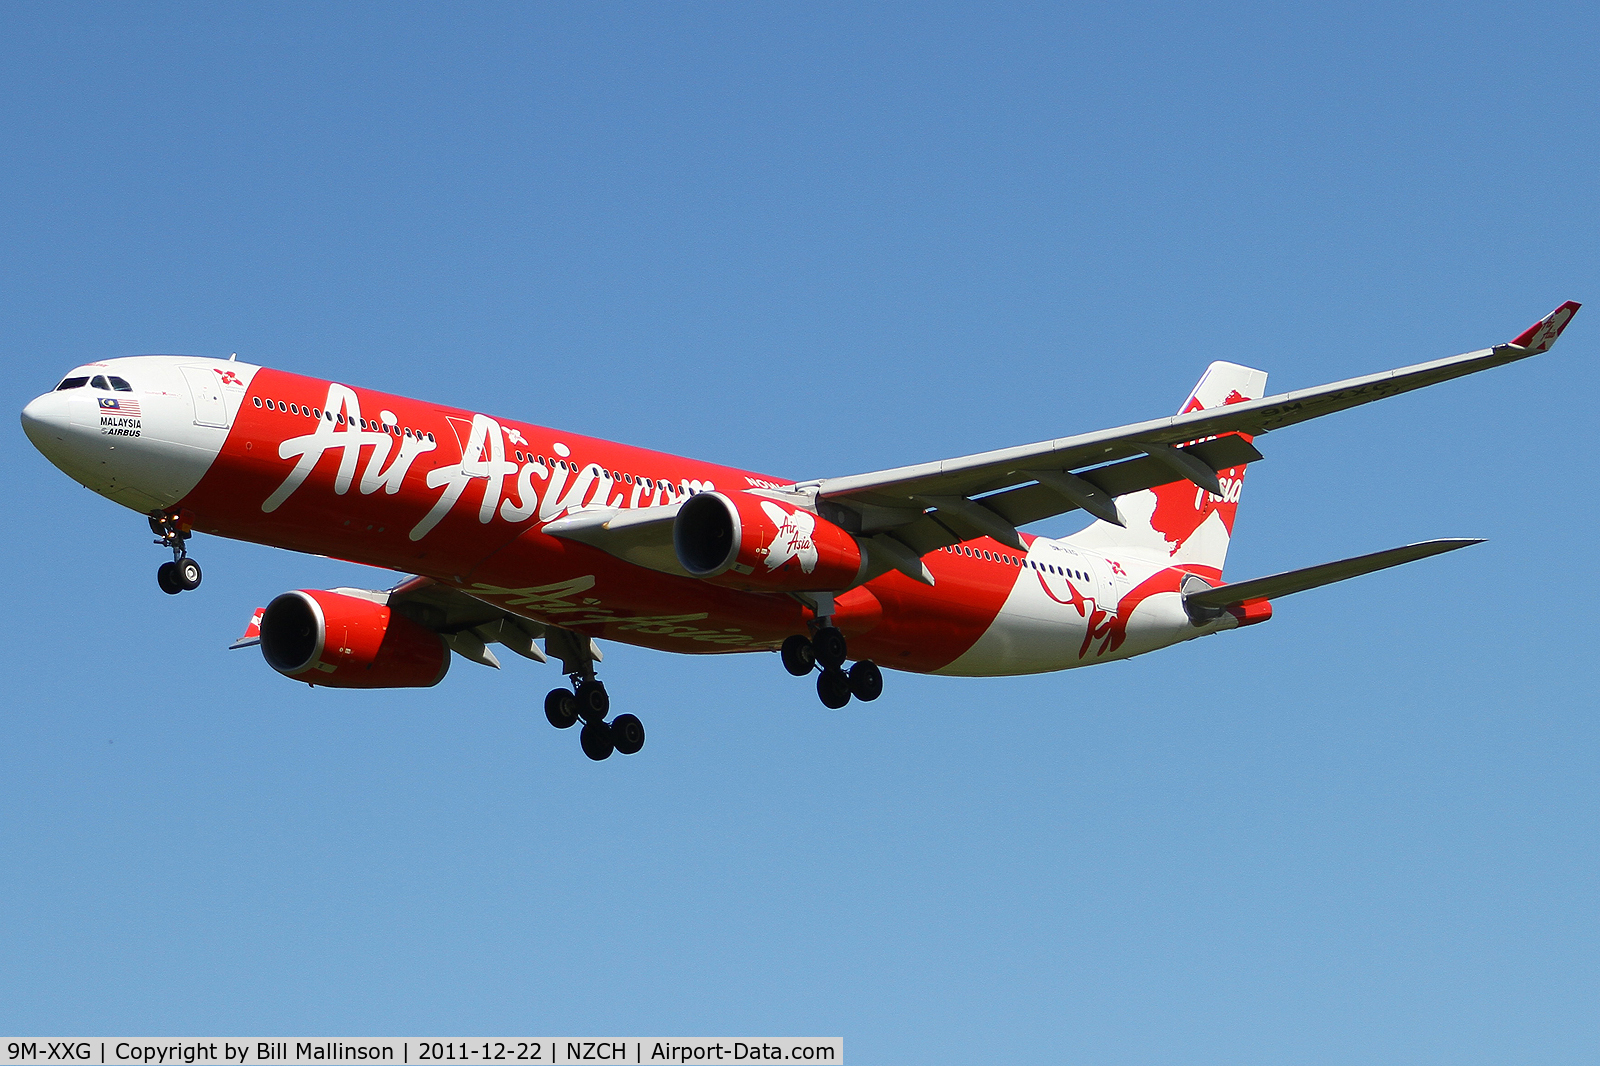 9M-XXG, 2010 Airbus A330-343X C/N 1131, finals to 02